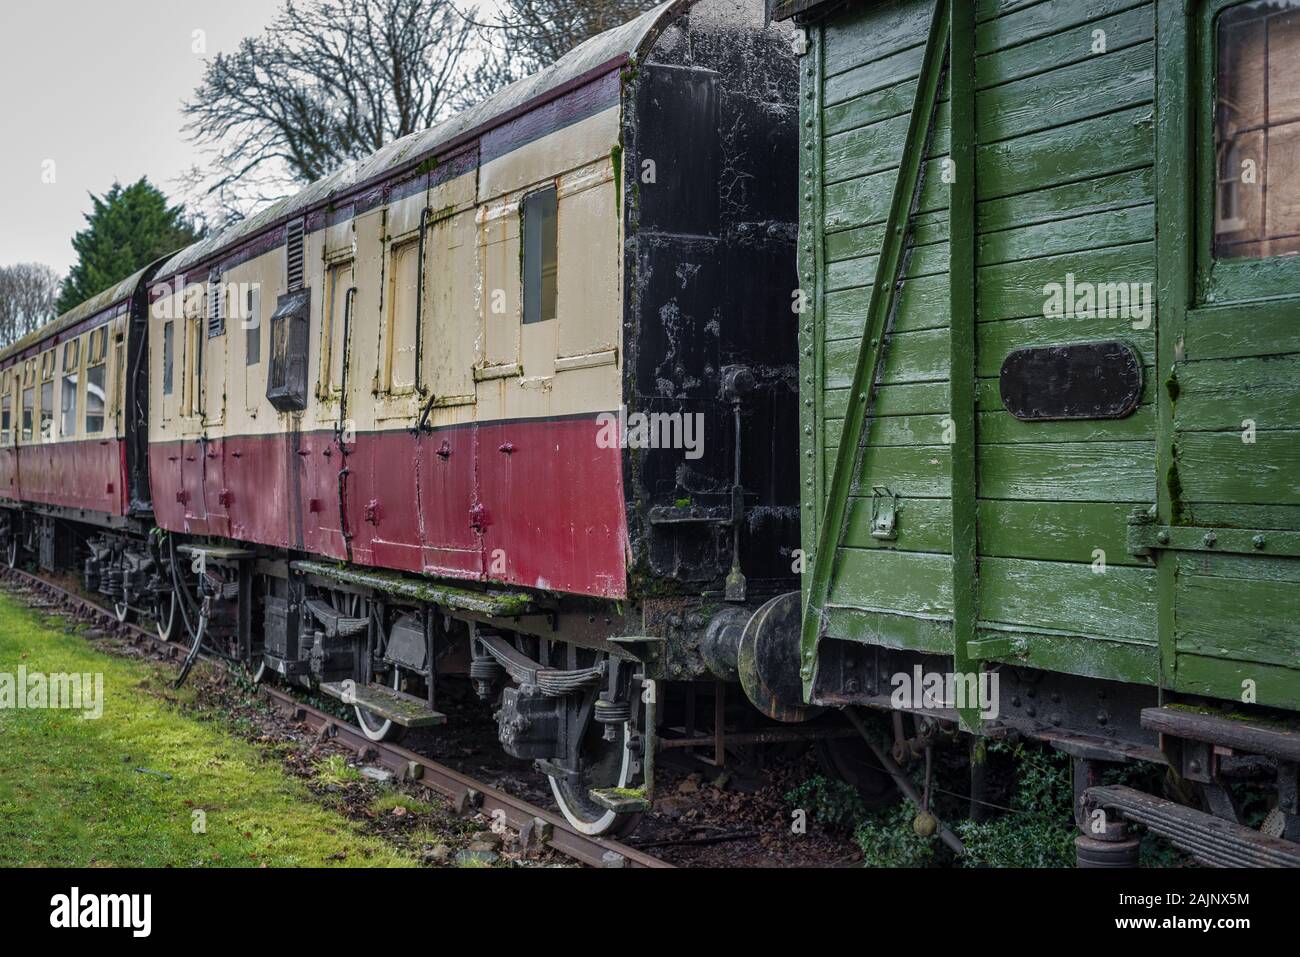 Old train carrages on a disused railway track Stock Photo